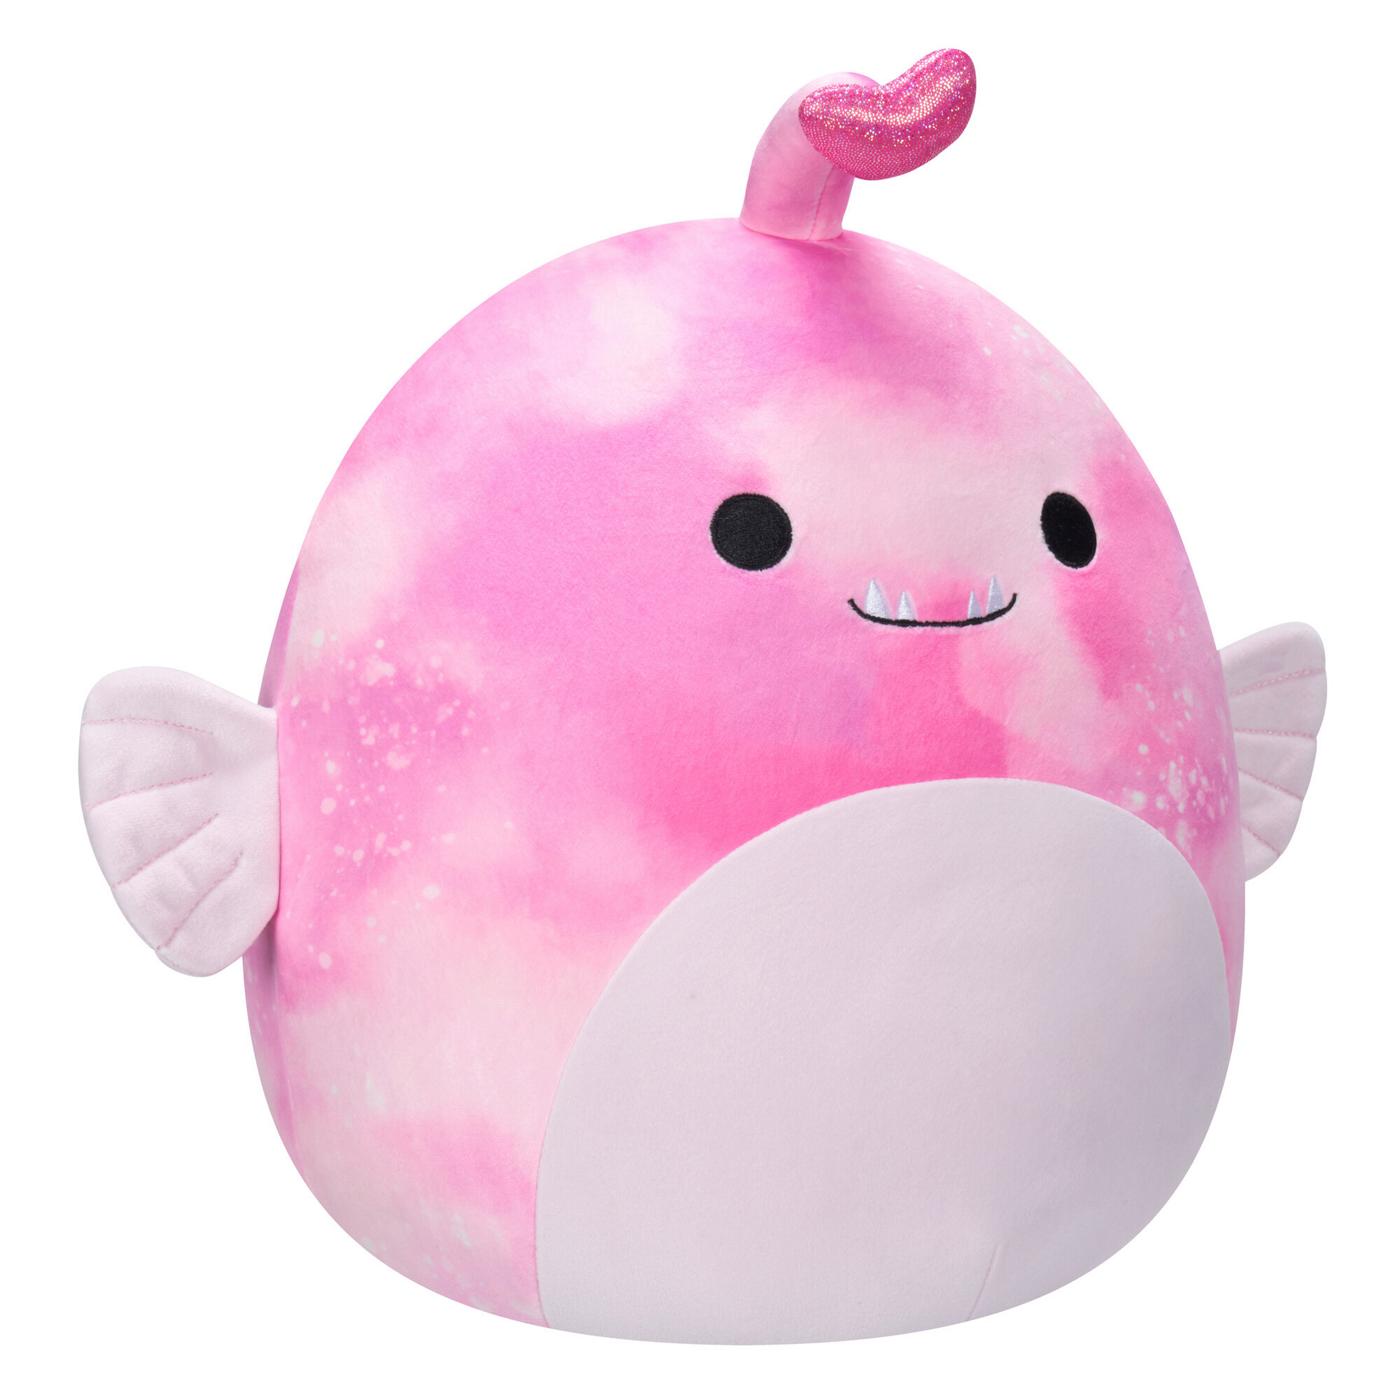 Squishmallows Sy the Pink Angler Fish Valentine's Plush; image 2 of 3